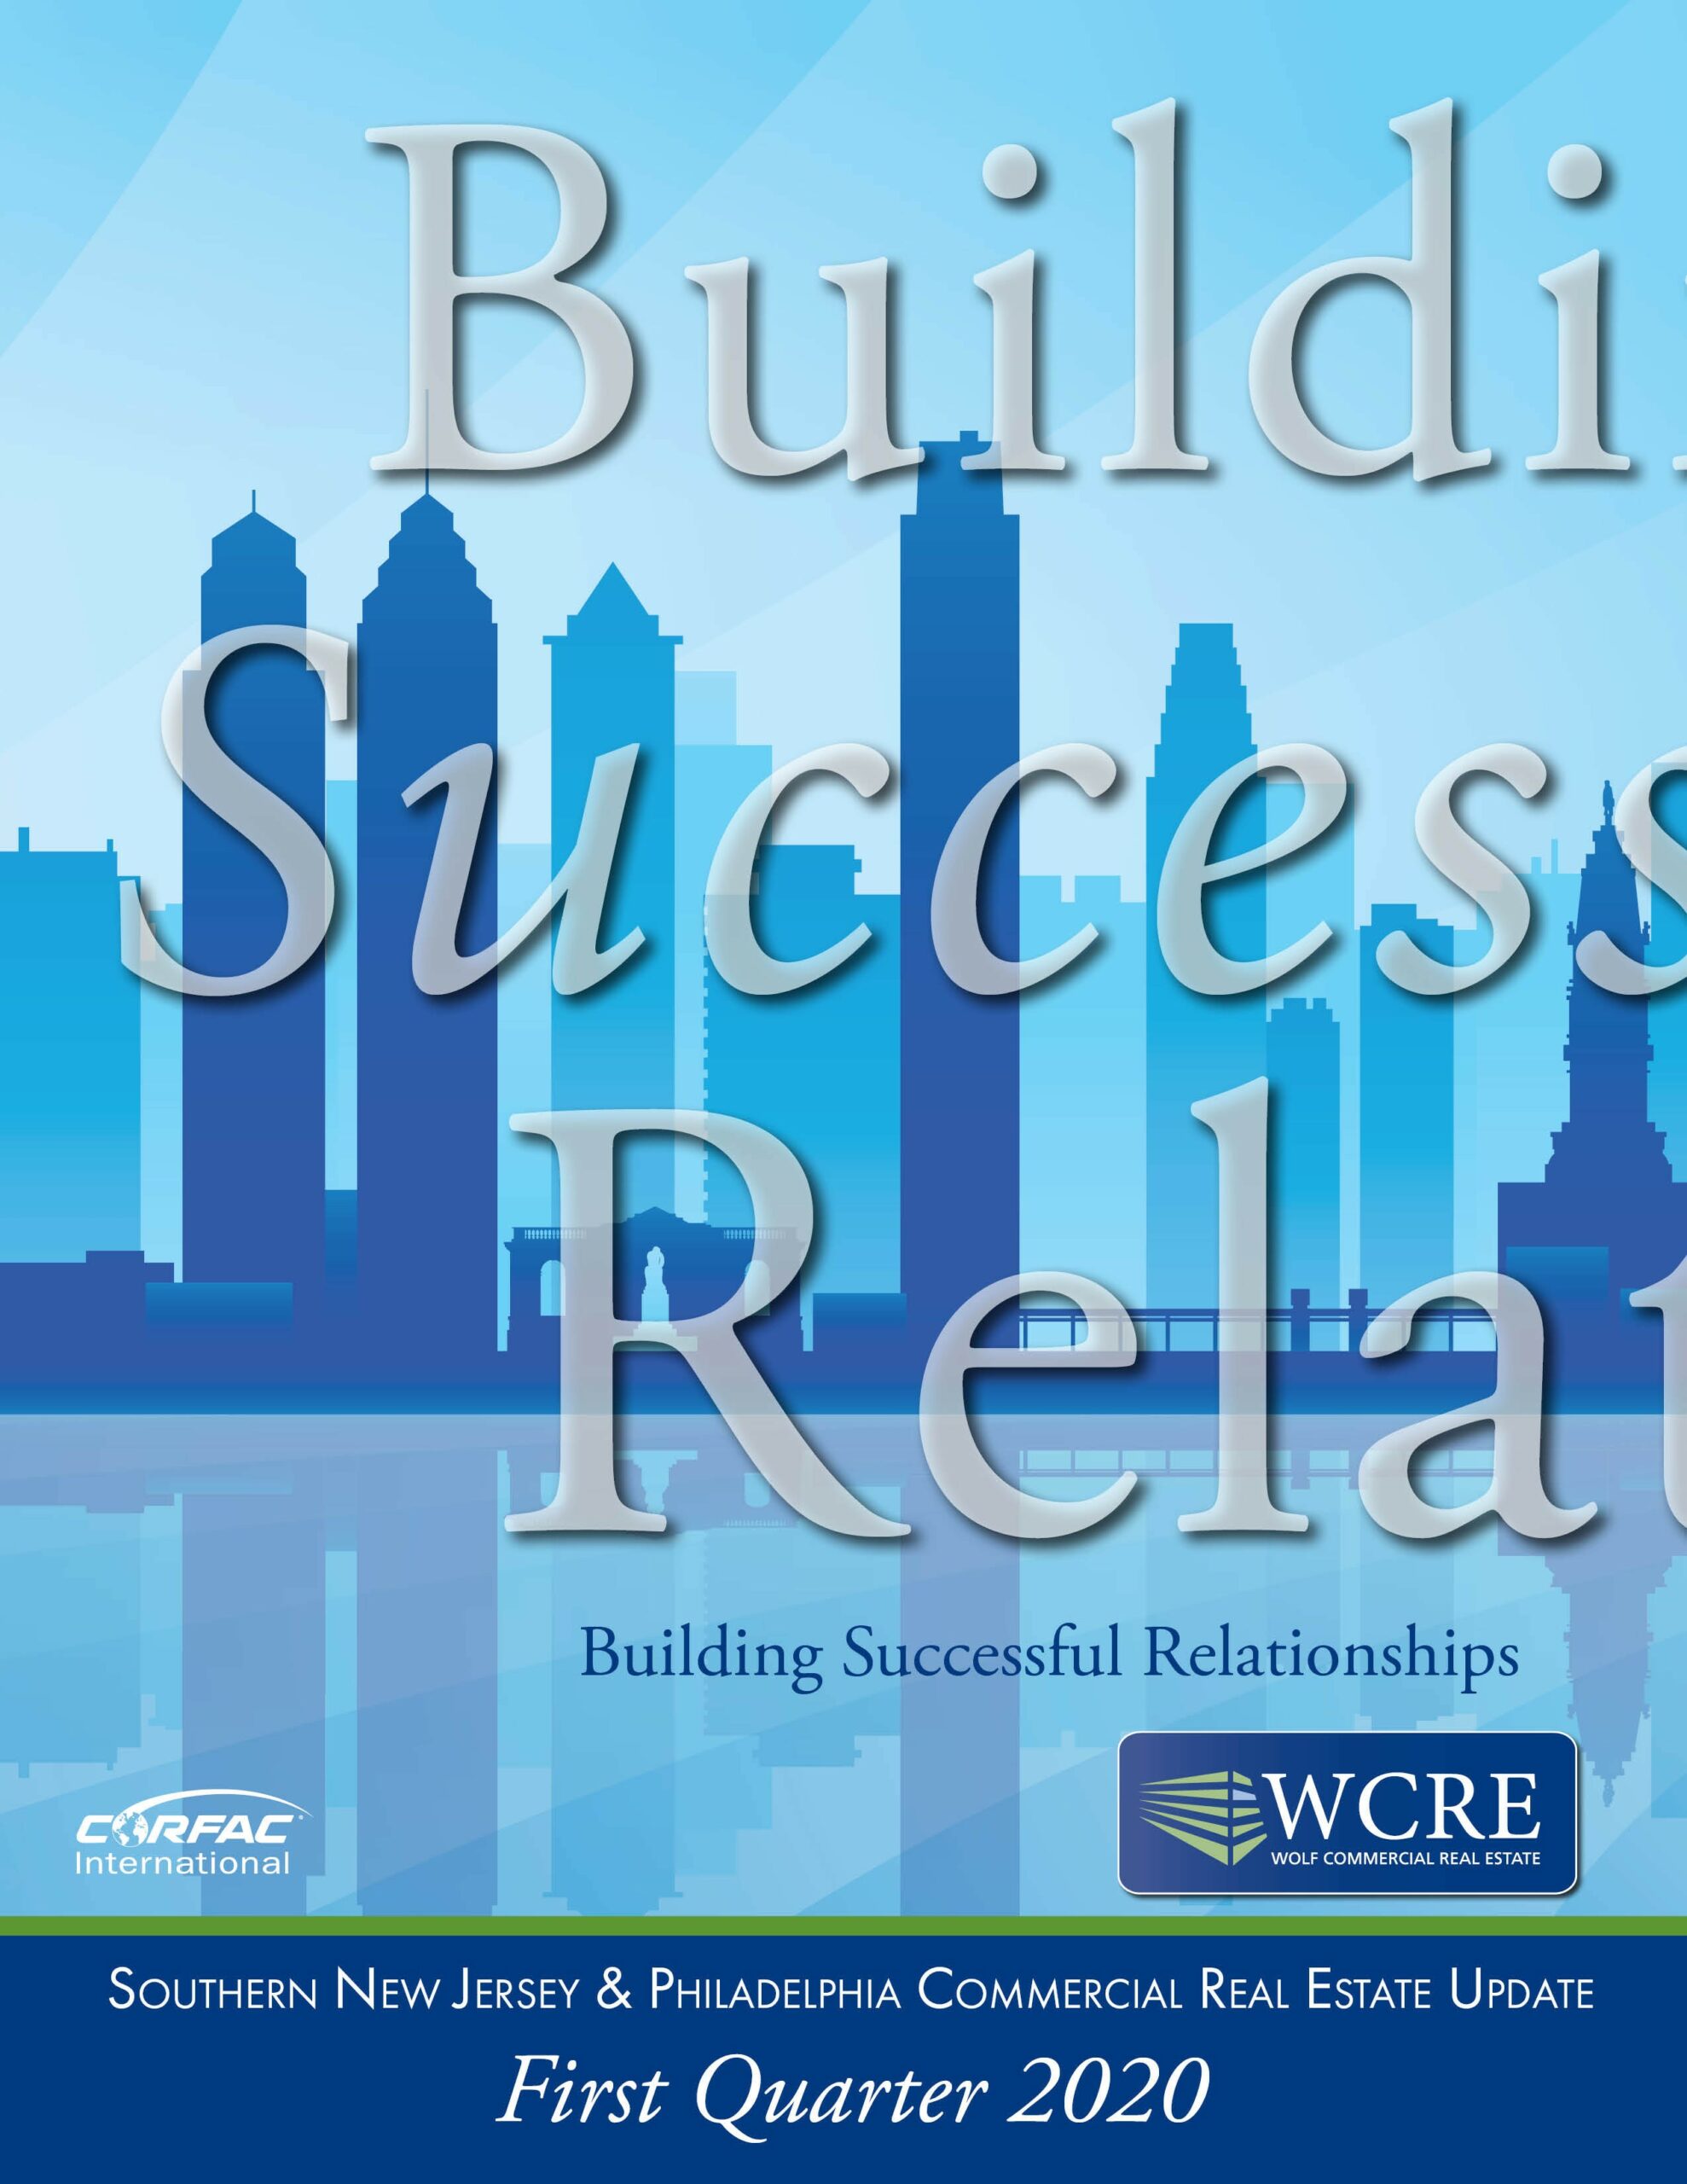 WCRE FIRST QUARTER 2020 REPORT